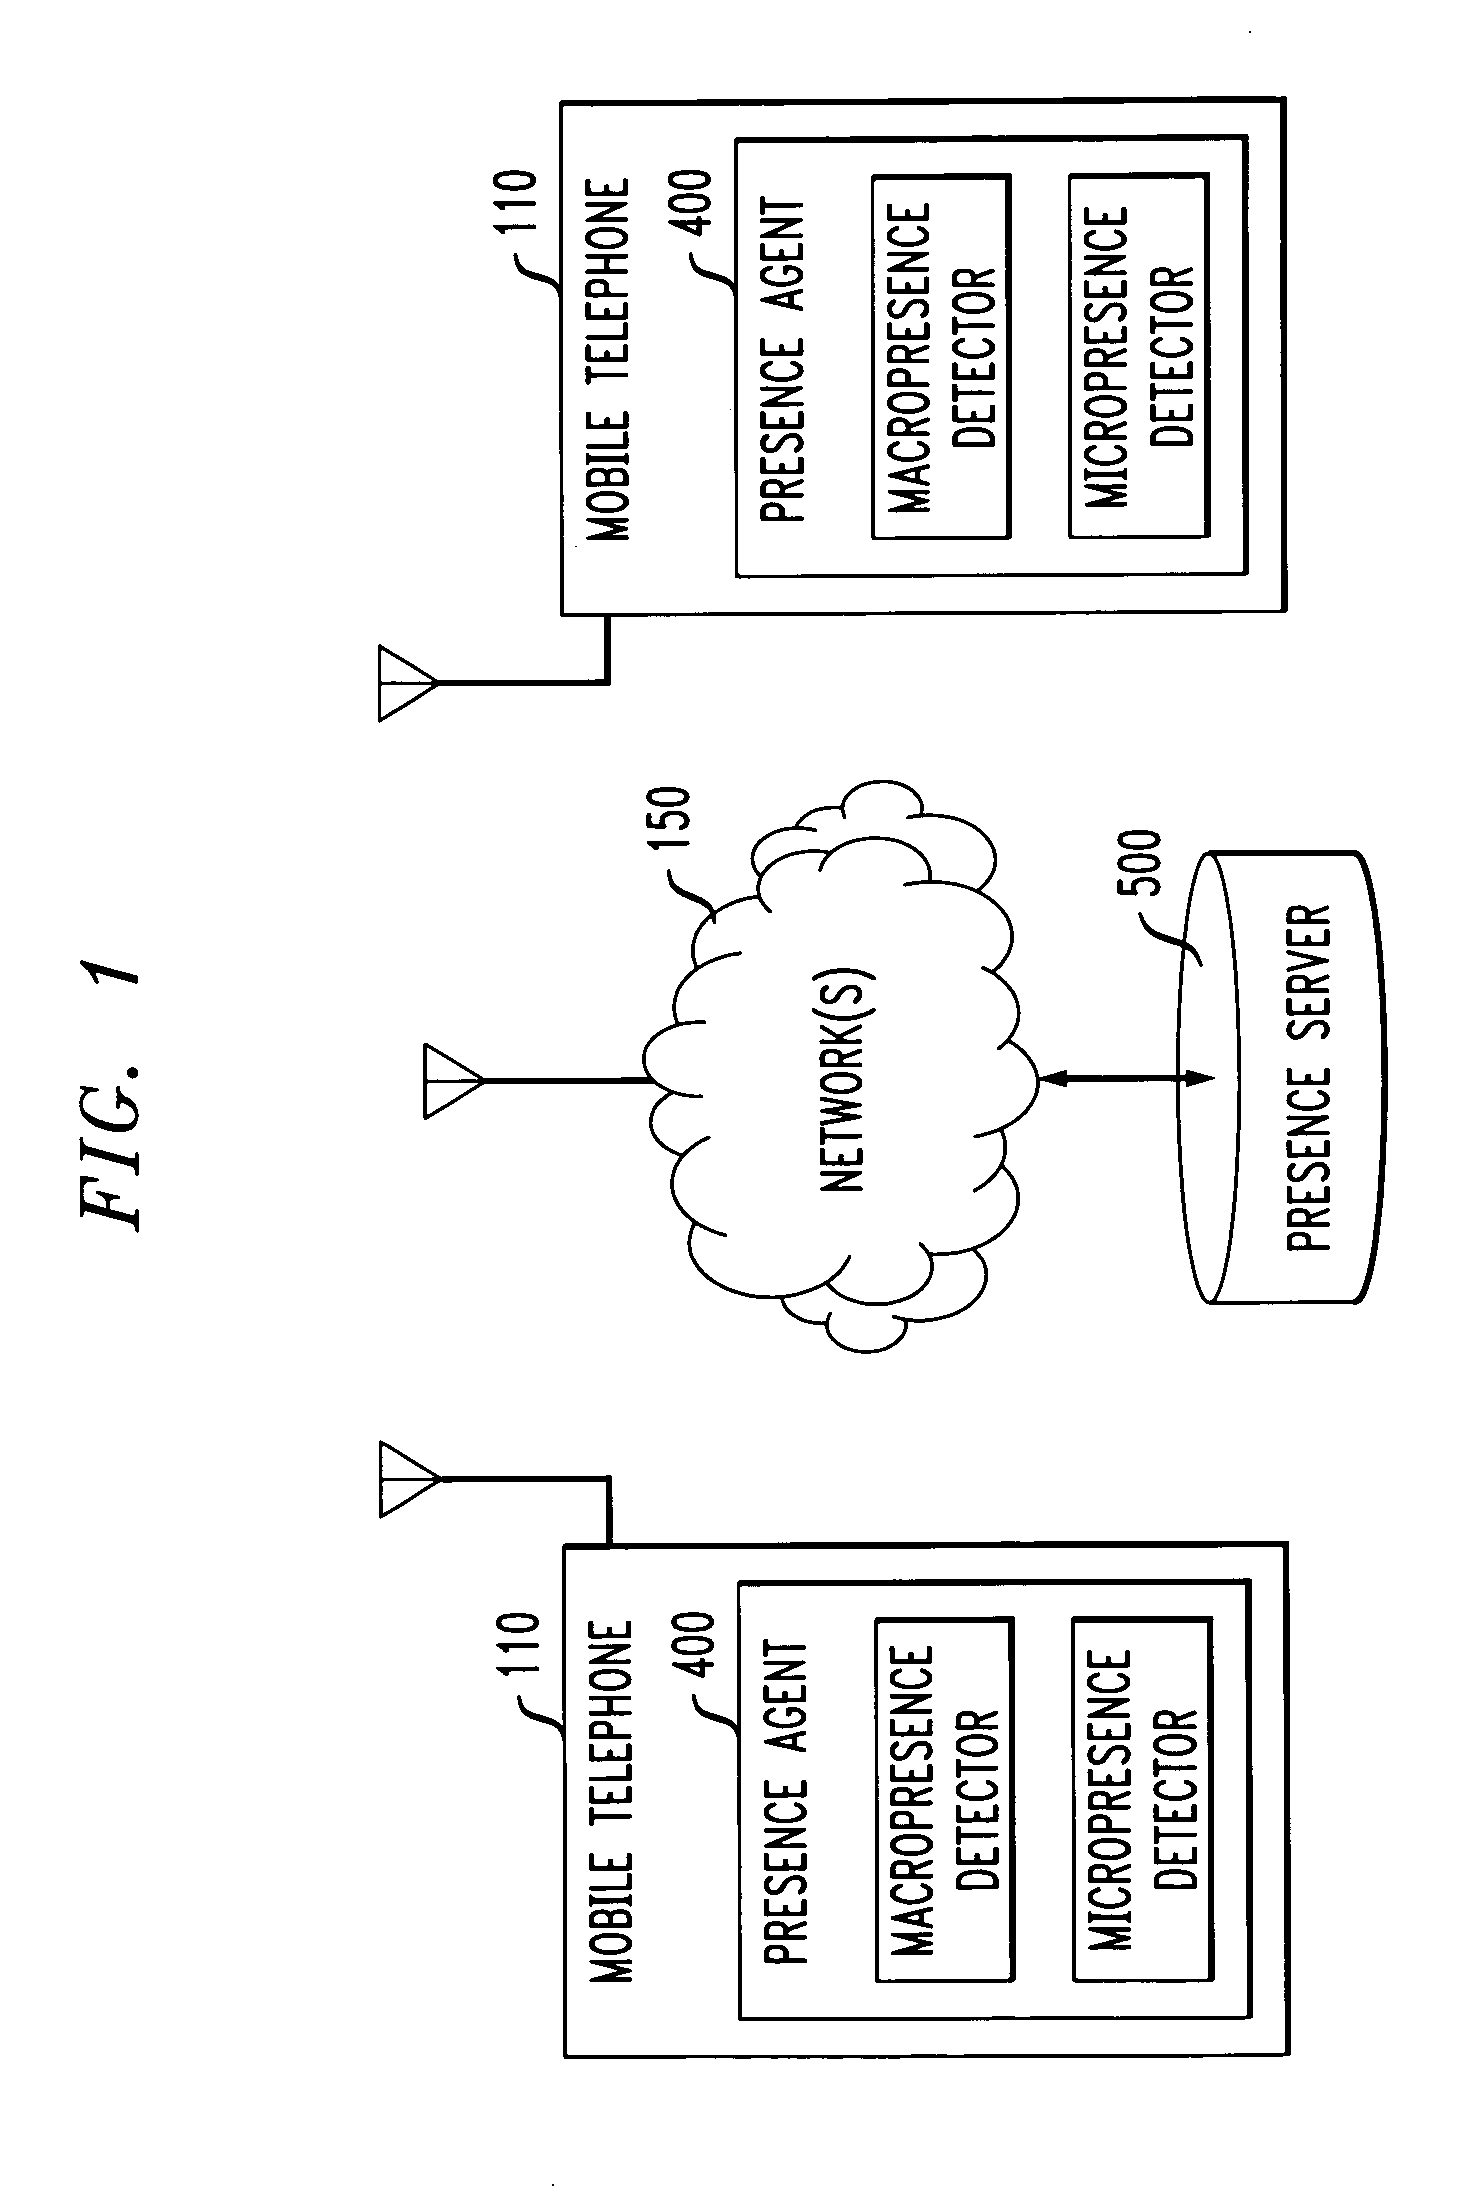 Methods and apparatus for determining a presence of a user